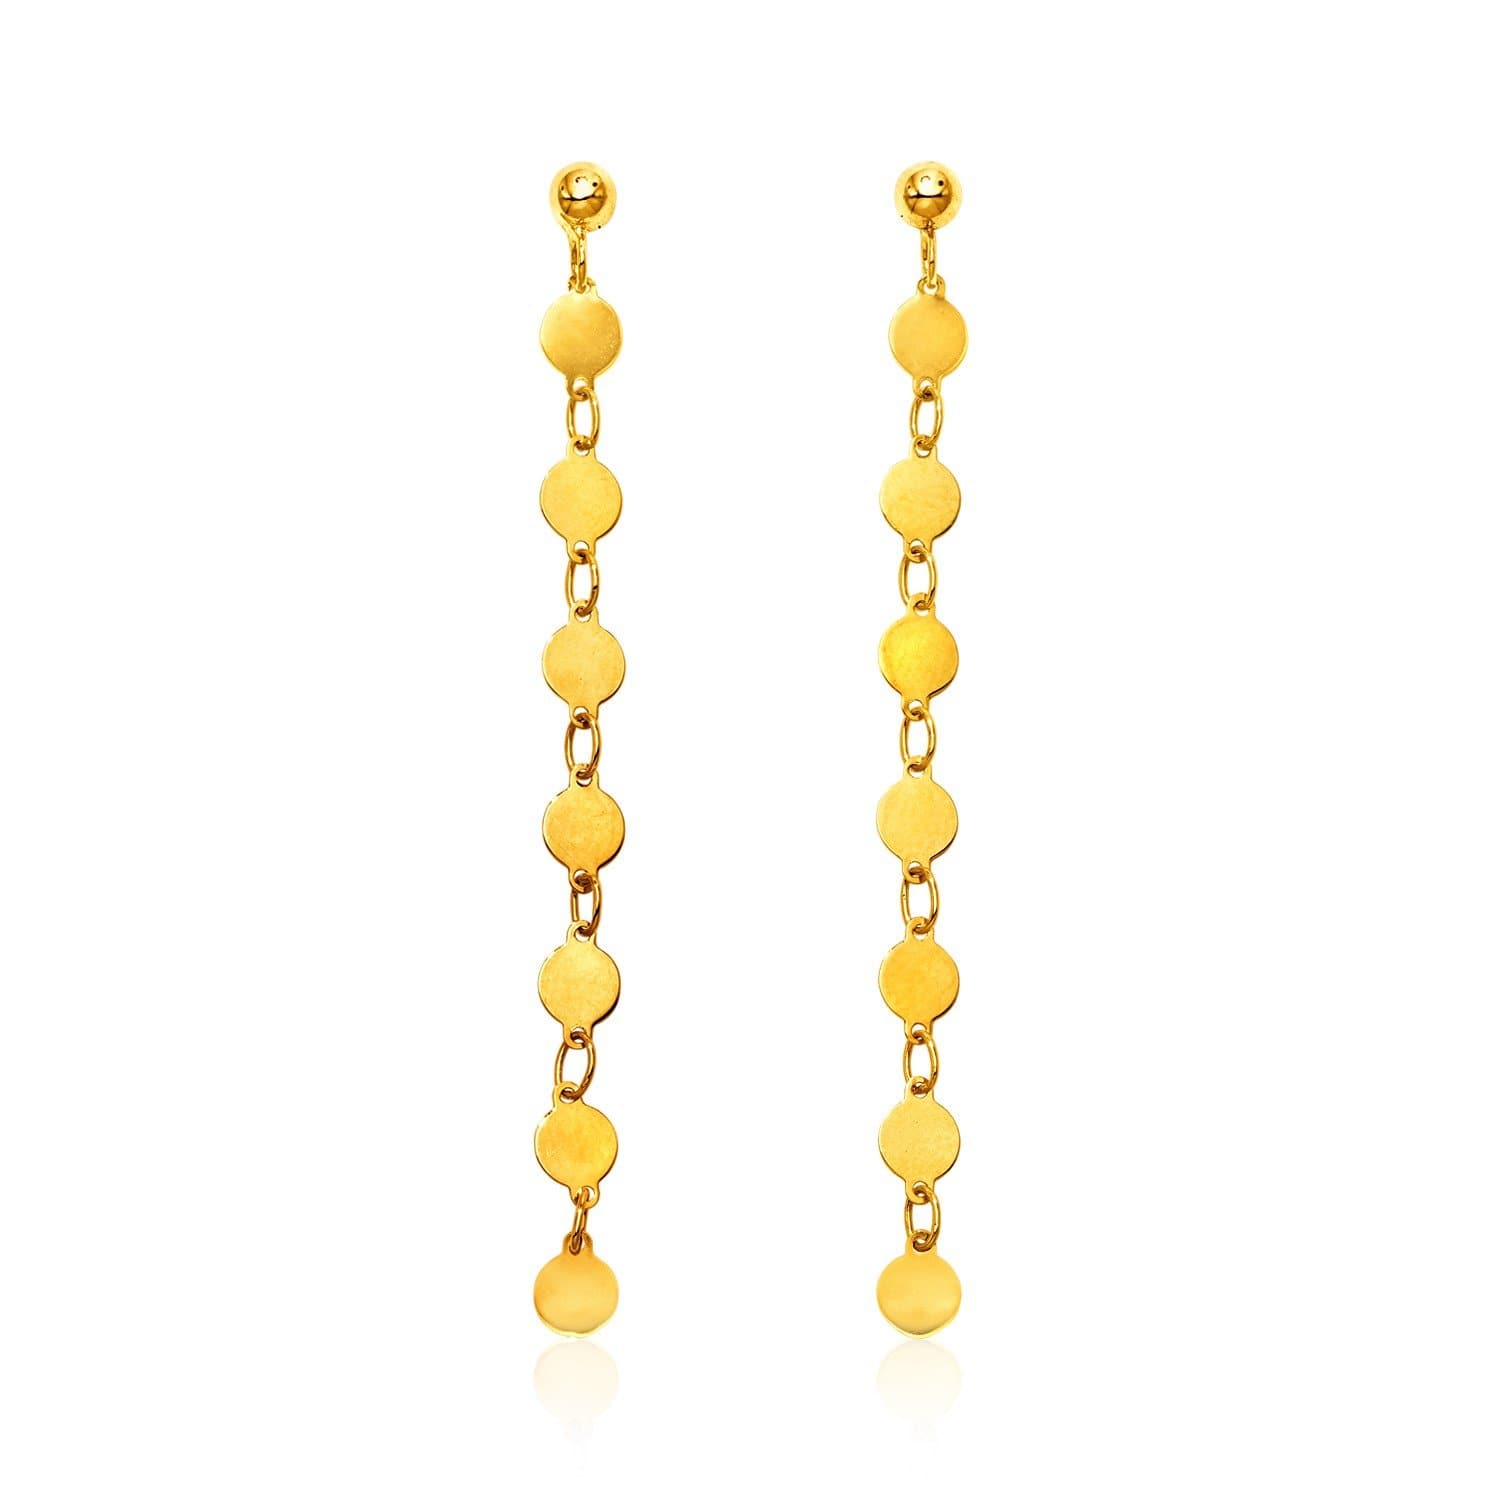 14k Yellow Gold Long Post Earrings with Polished Circles